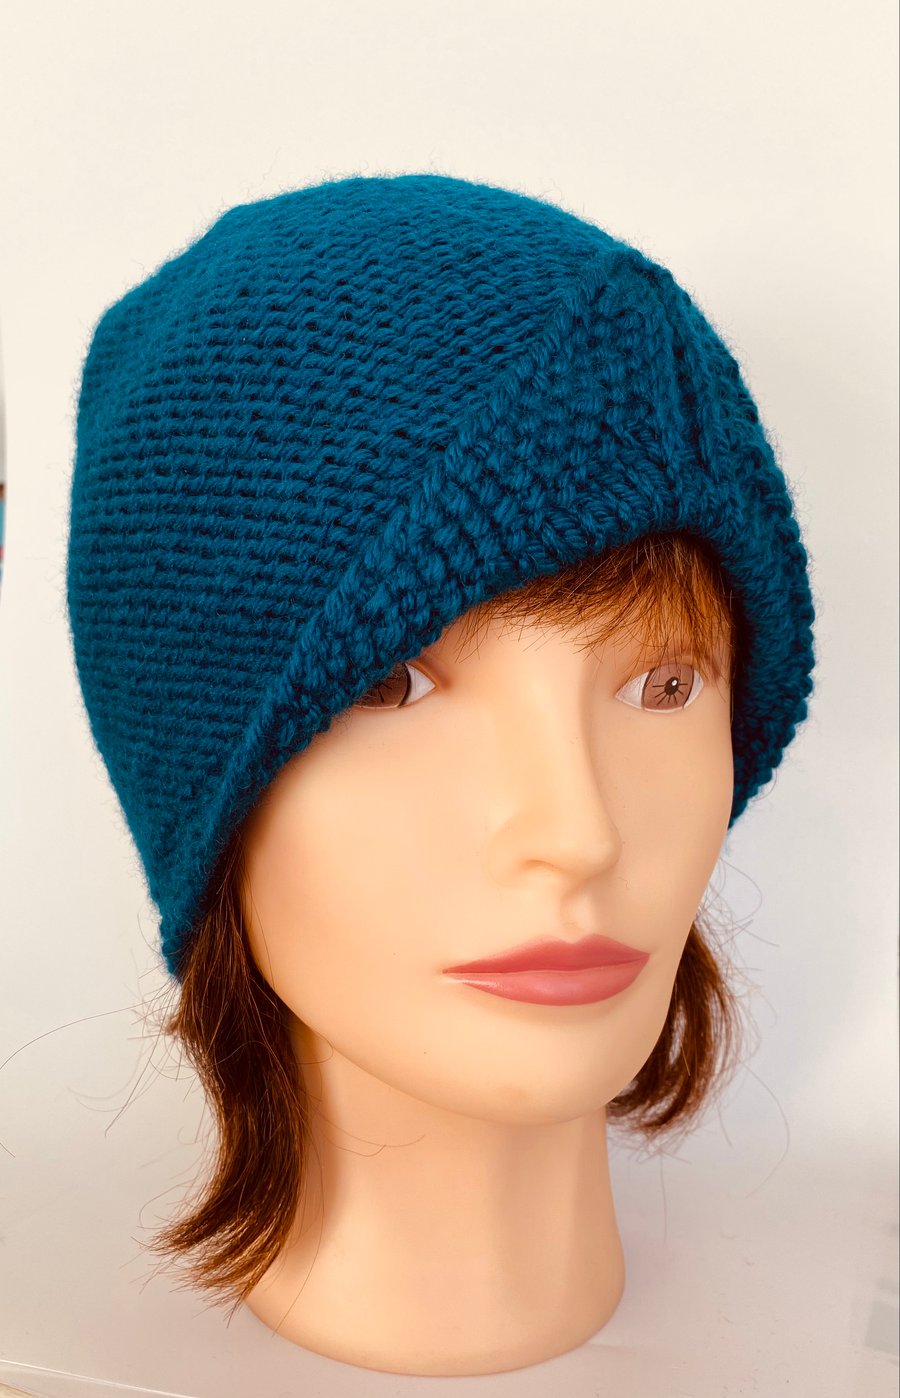 Teal Blue Turban 1940s Style Hat Hand knitted, Winter Stylish Hat